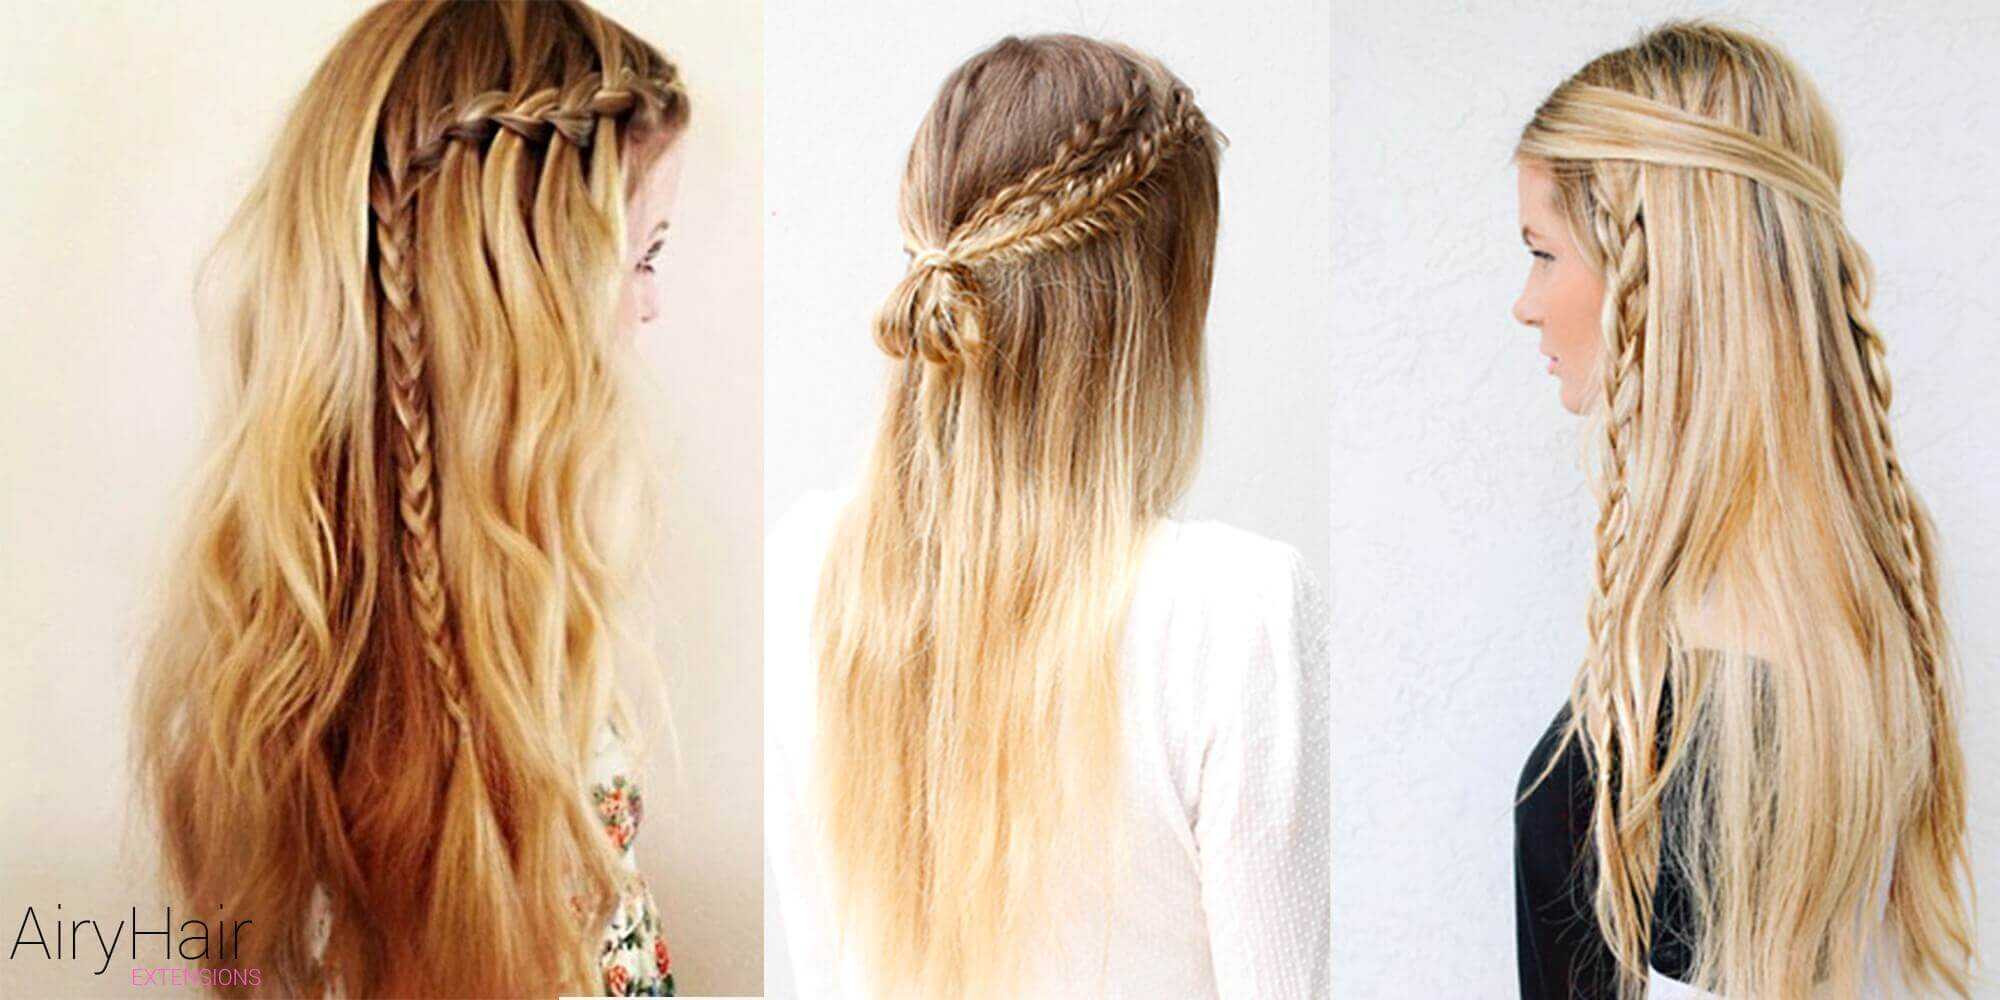 Easy Boho Hairstyles
 10 Best Chic And Creative Boho Hairstyles